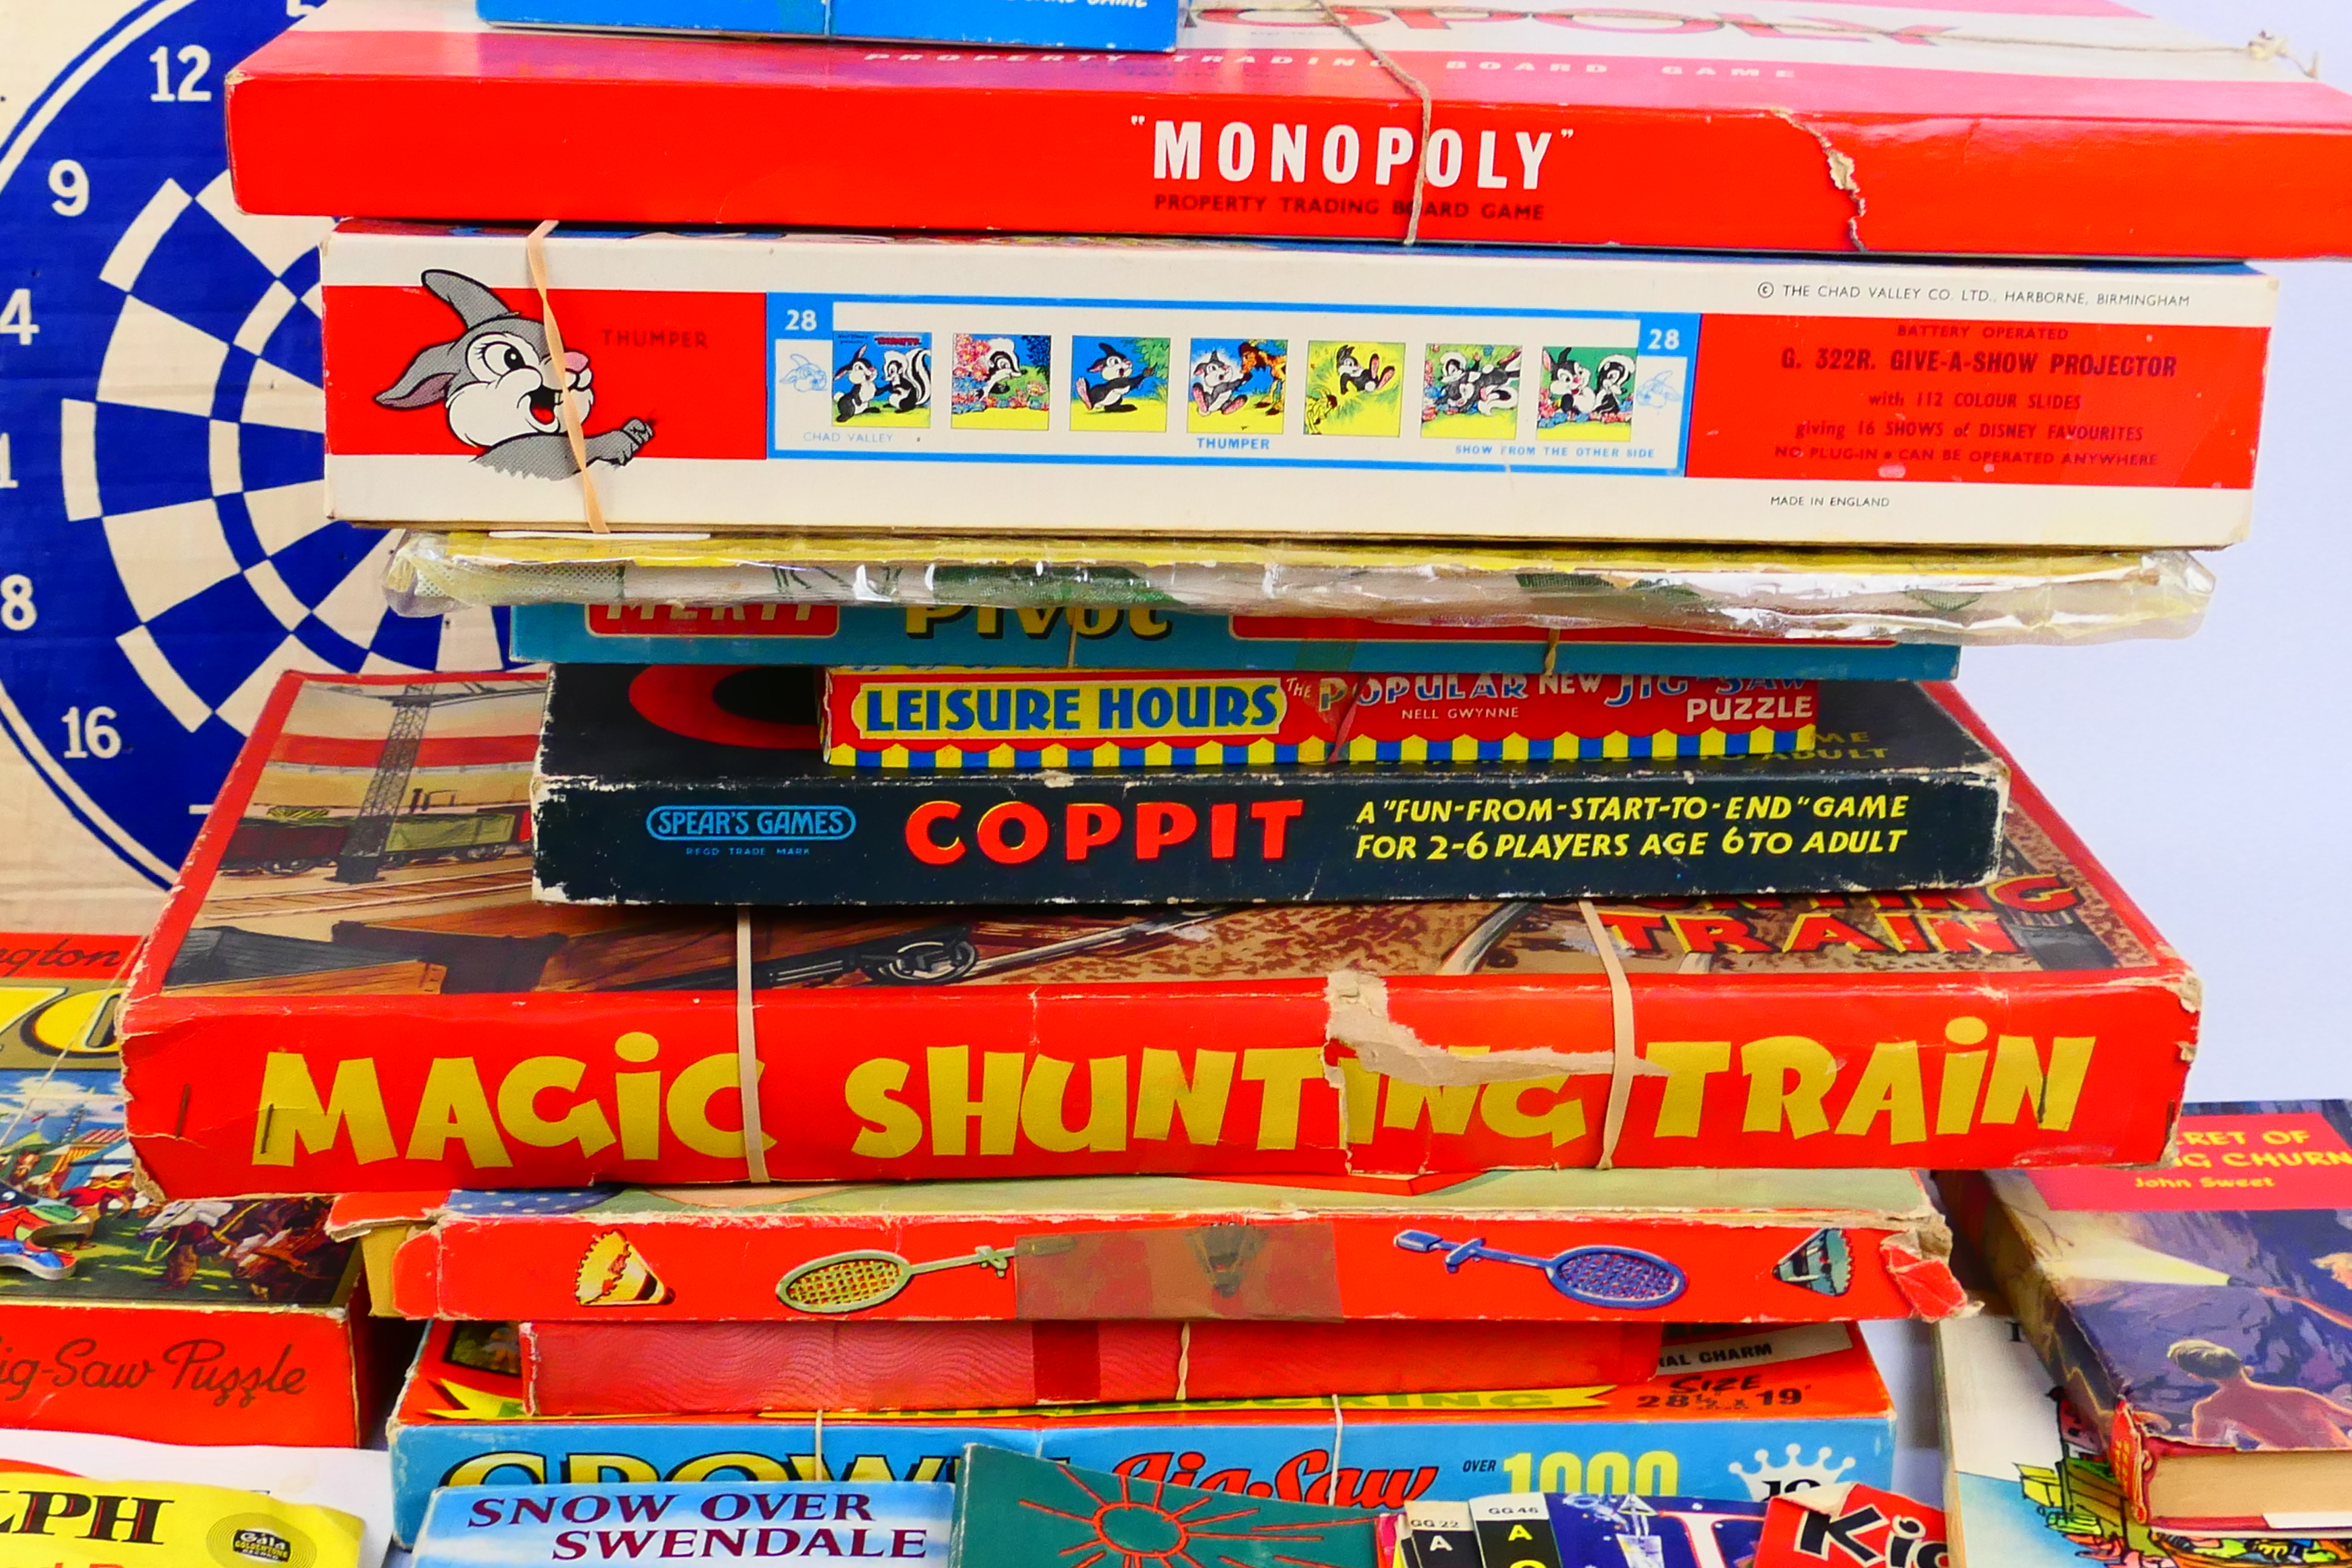 Waddington, TP, Chad Valley, Monopoly, Spear's Games - 13 x vintage boxed Jigsaws, games, books, - Image 2 of 5